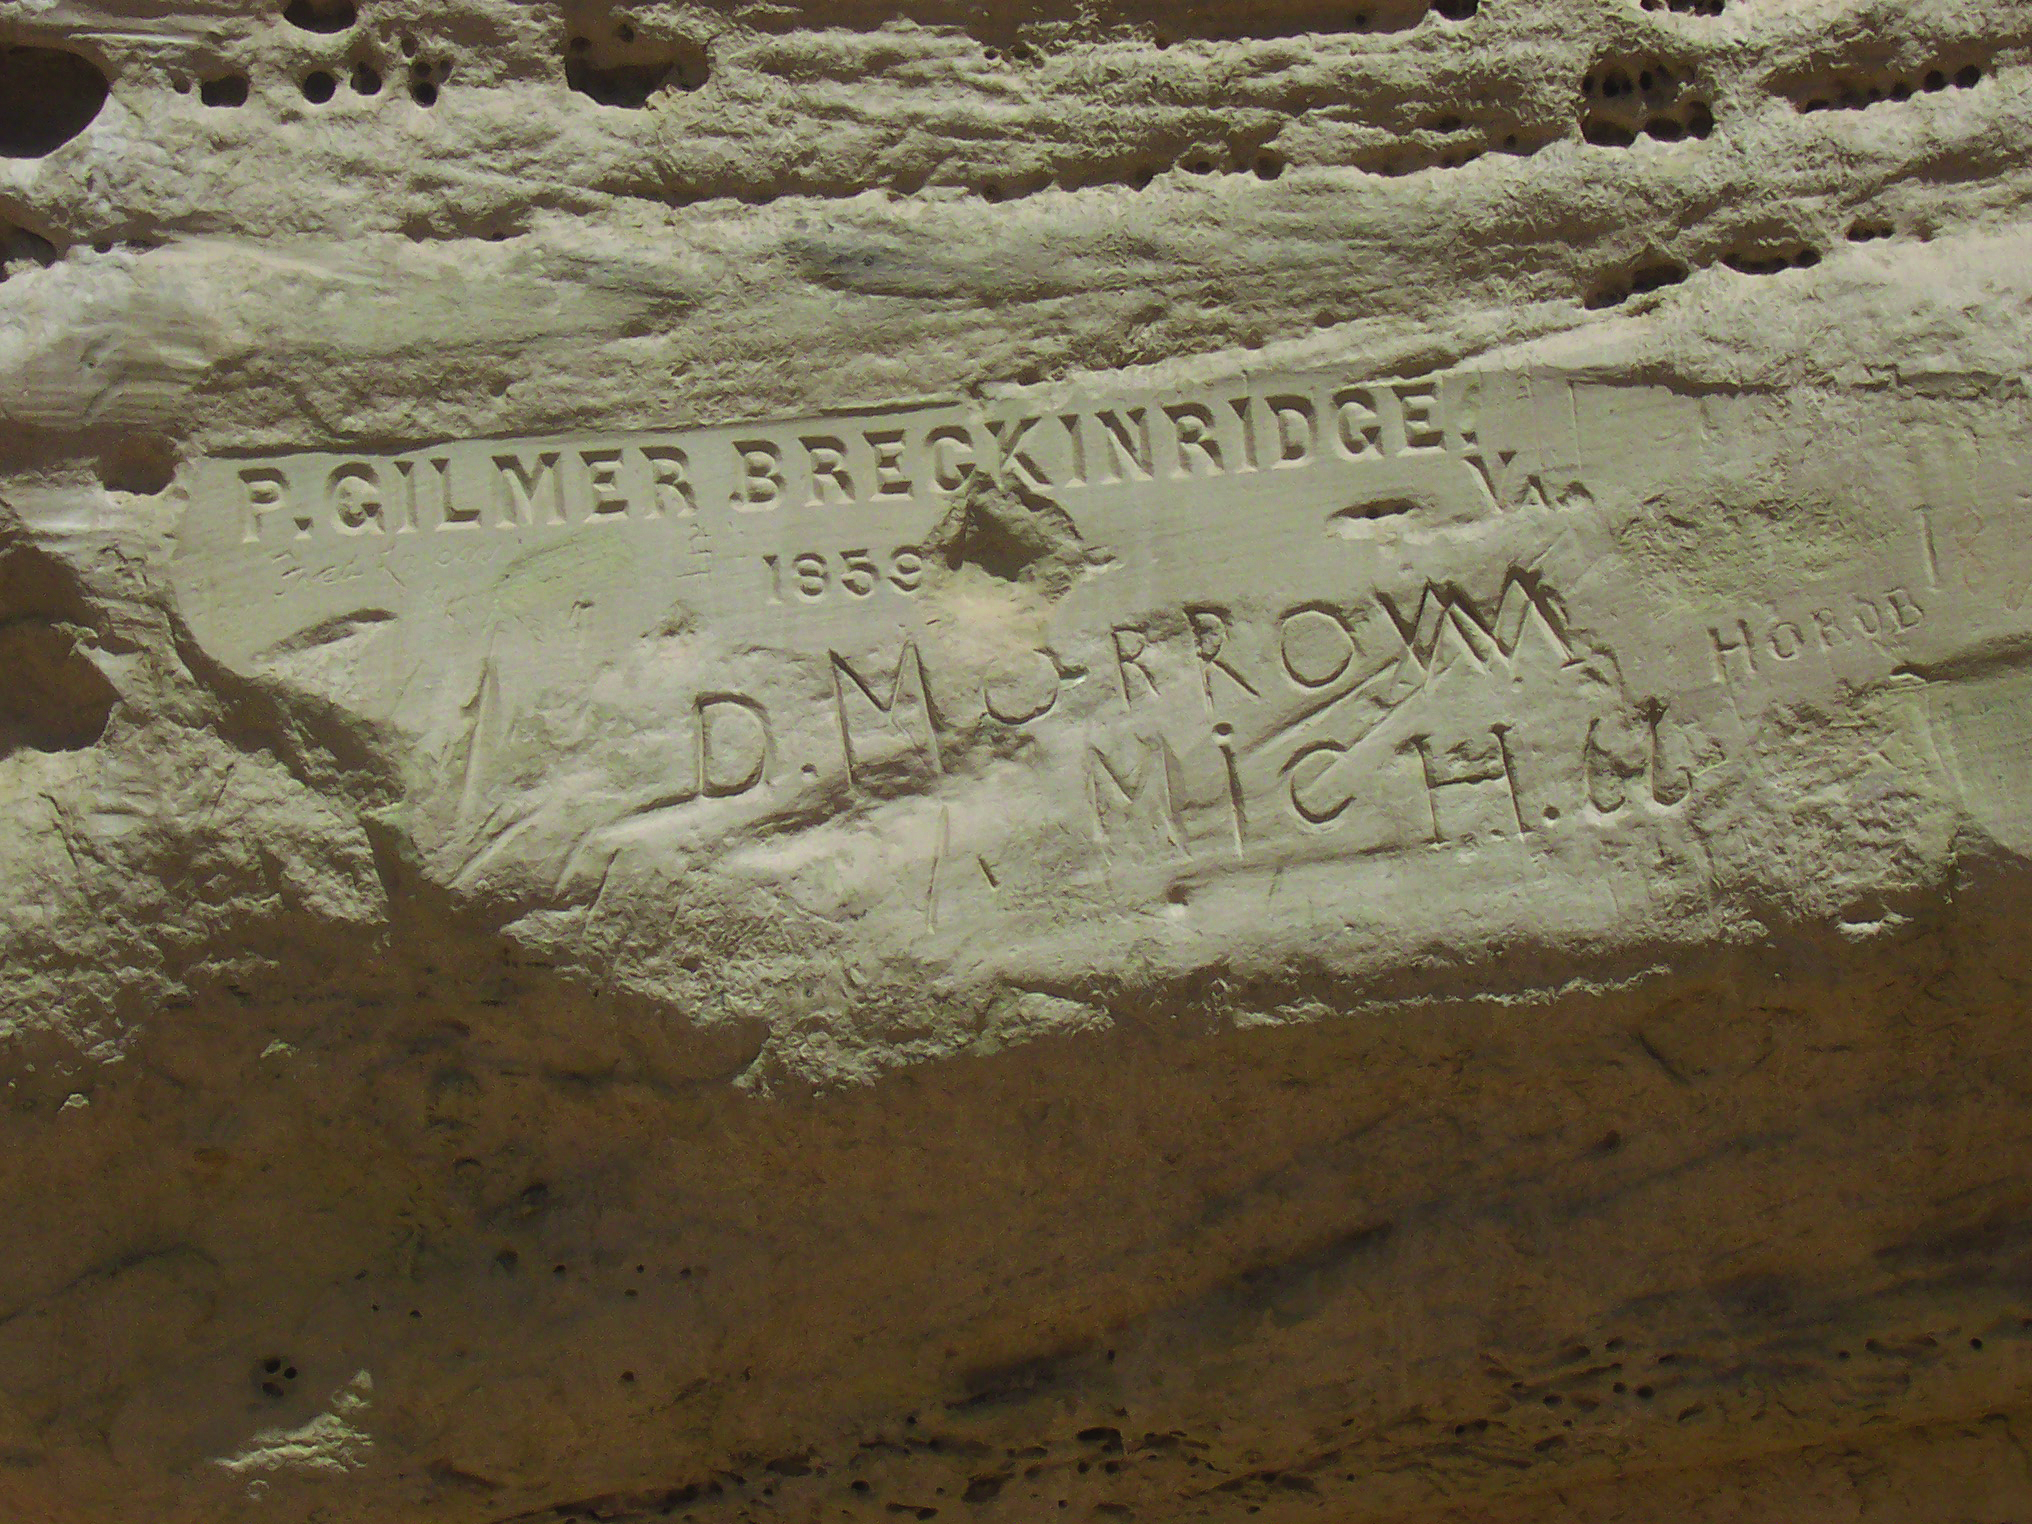 Very  neat block lettering reads P. Gilmer Breckenridge 1859, etched into El Morro's sandstone rock, with other inscriptions around it.